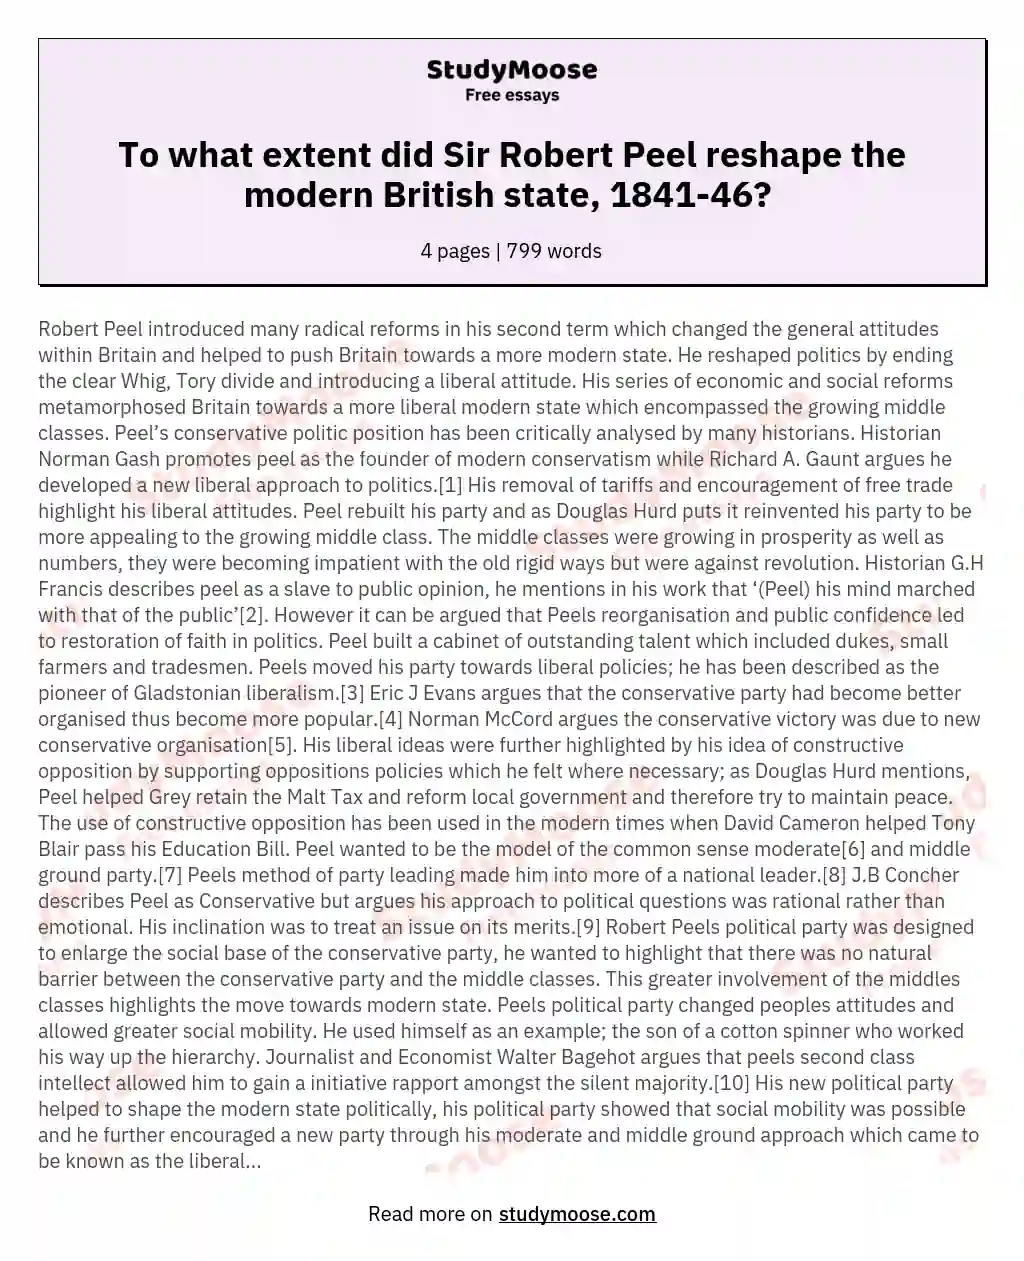 To what extent did Sir Robert Peel reshape the modern British state, 1841-46? 